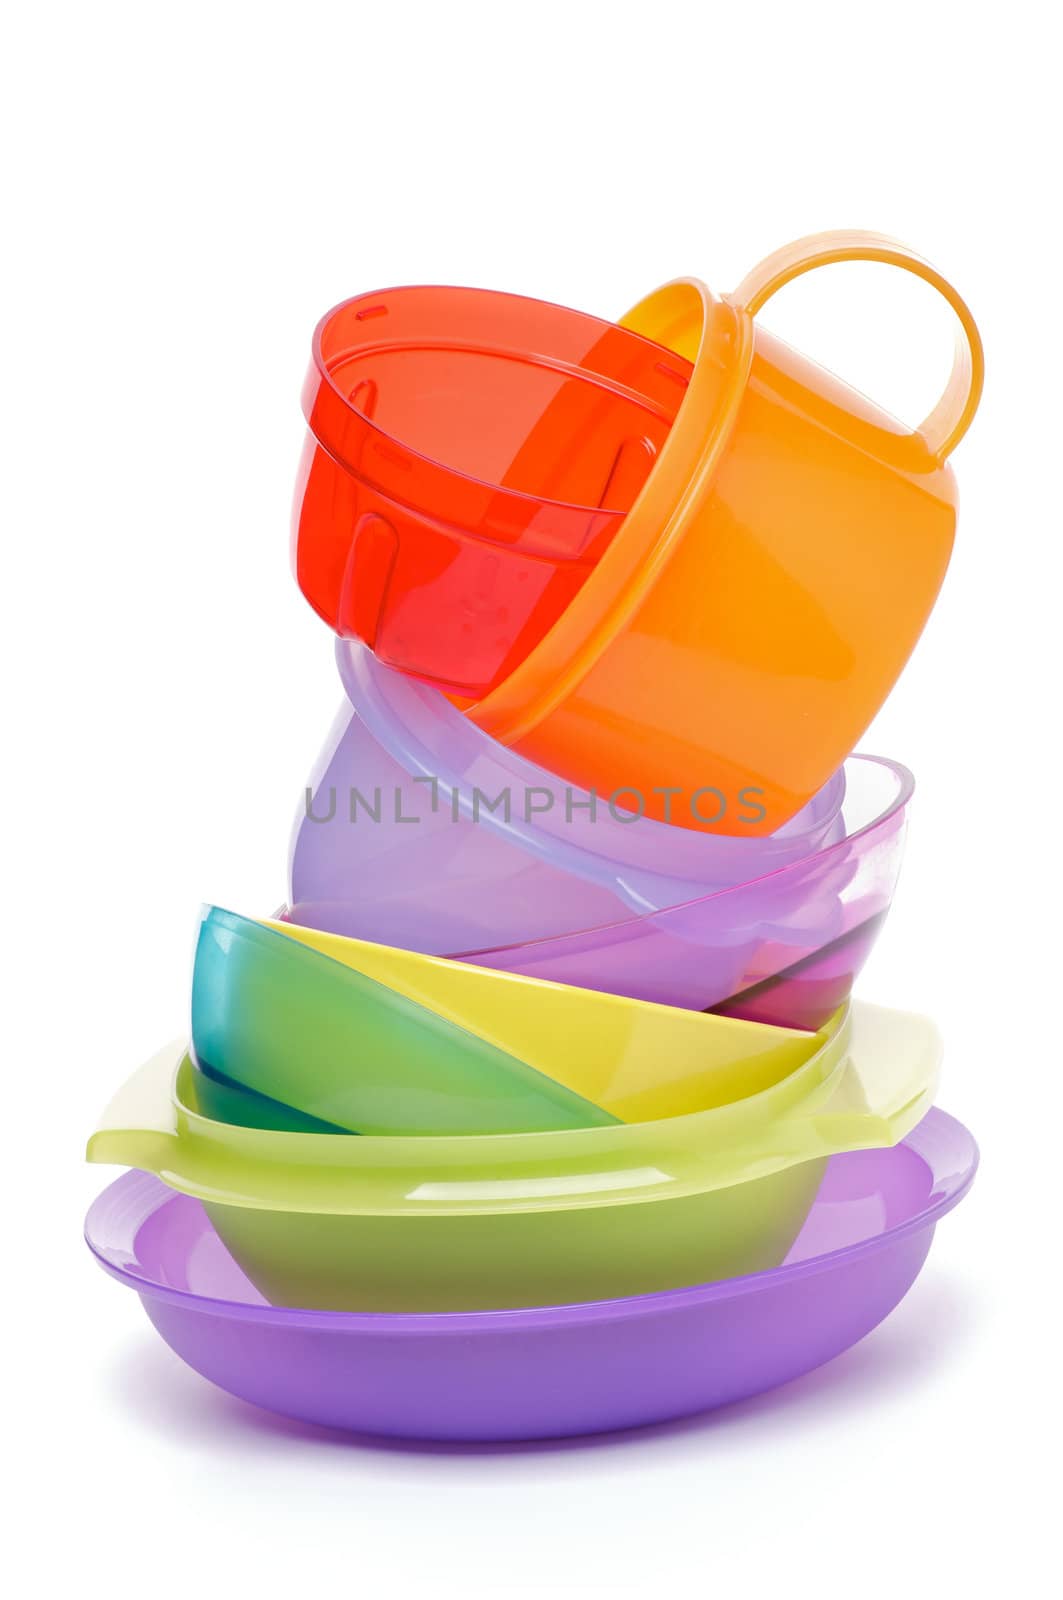 Stack of Color Plastic Bowls isolated on white background